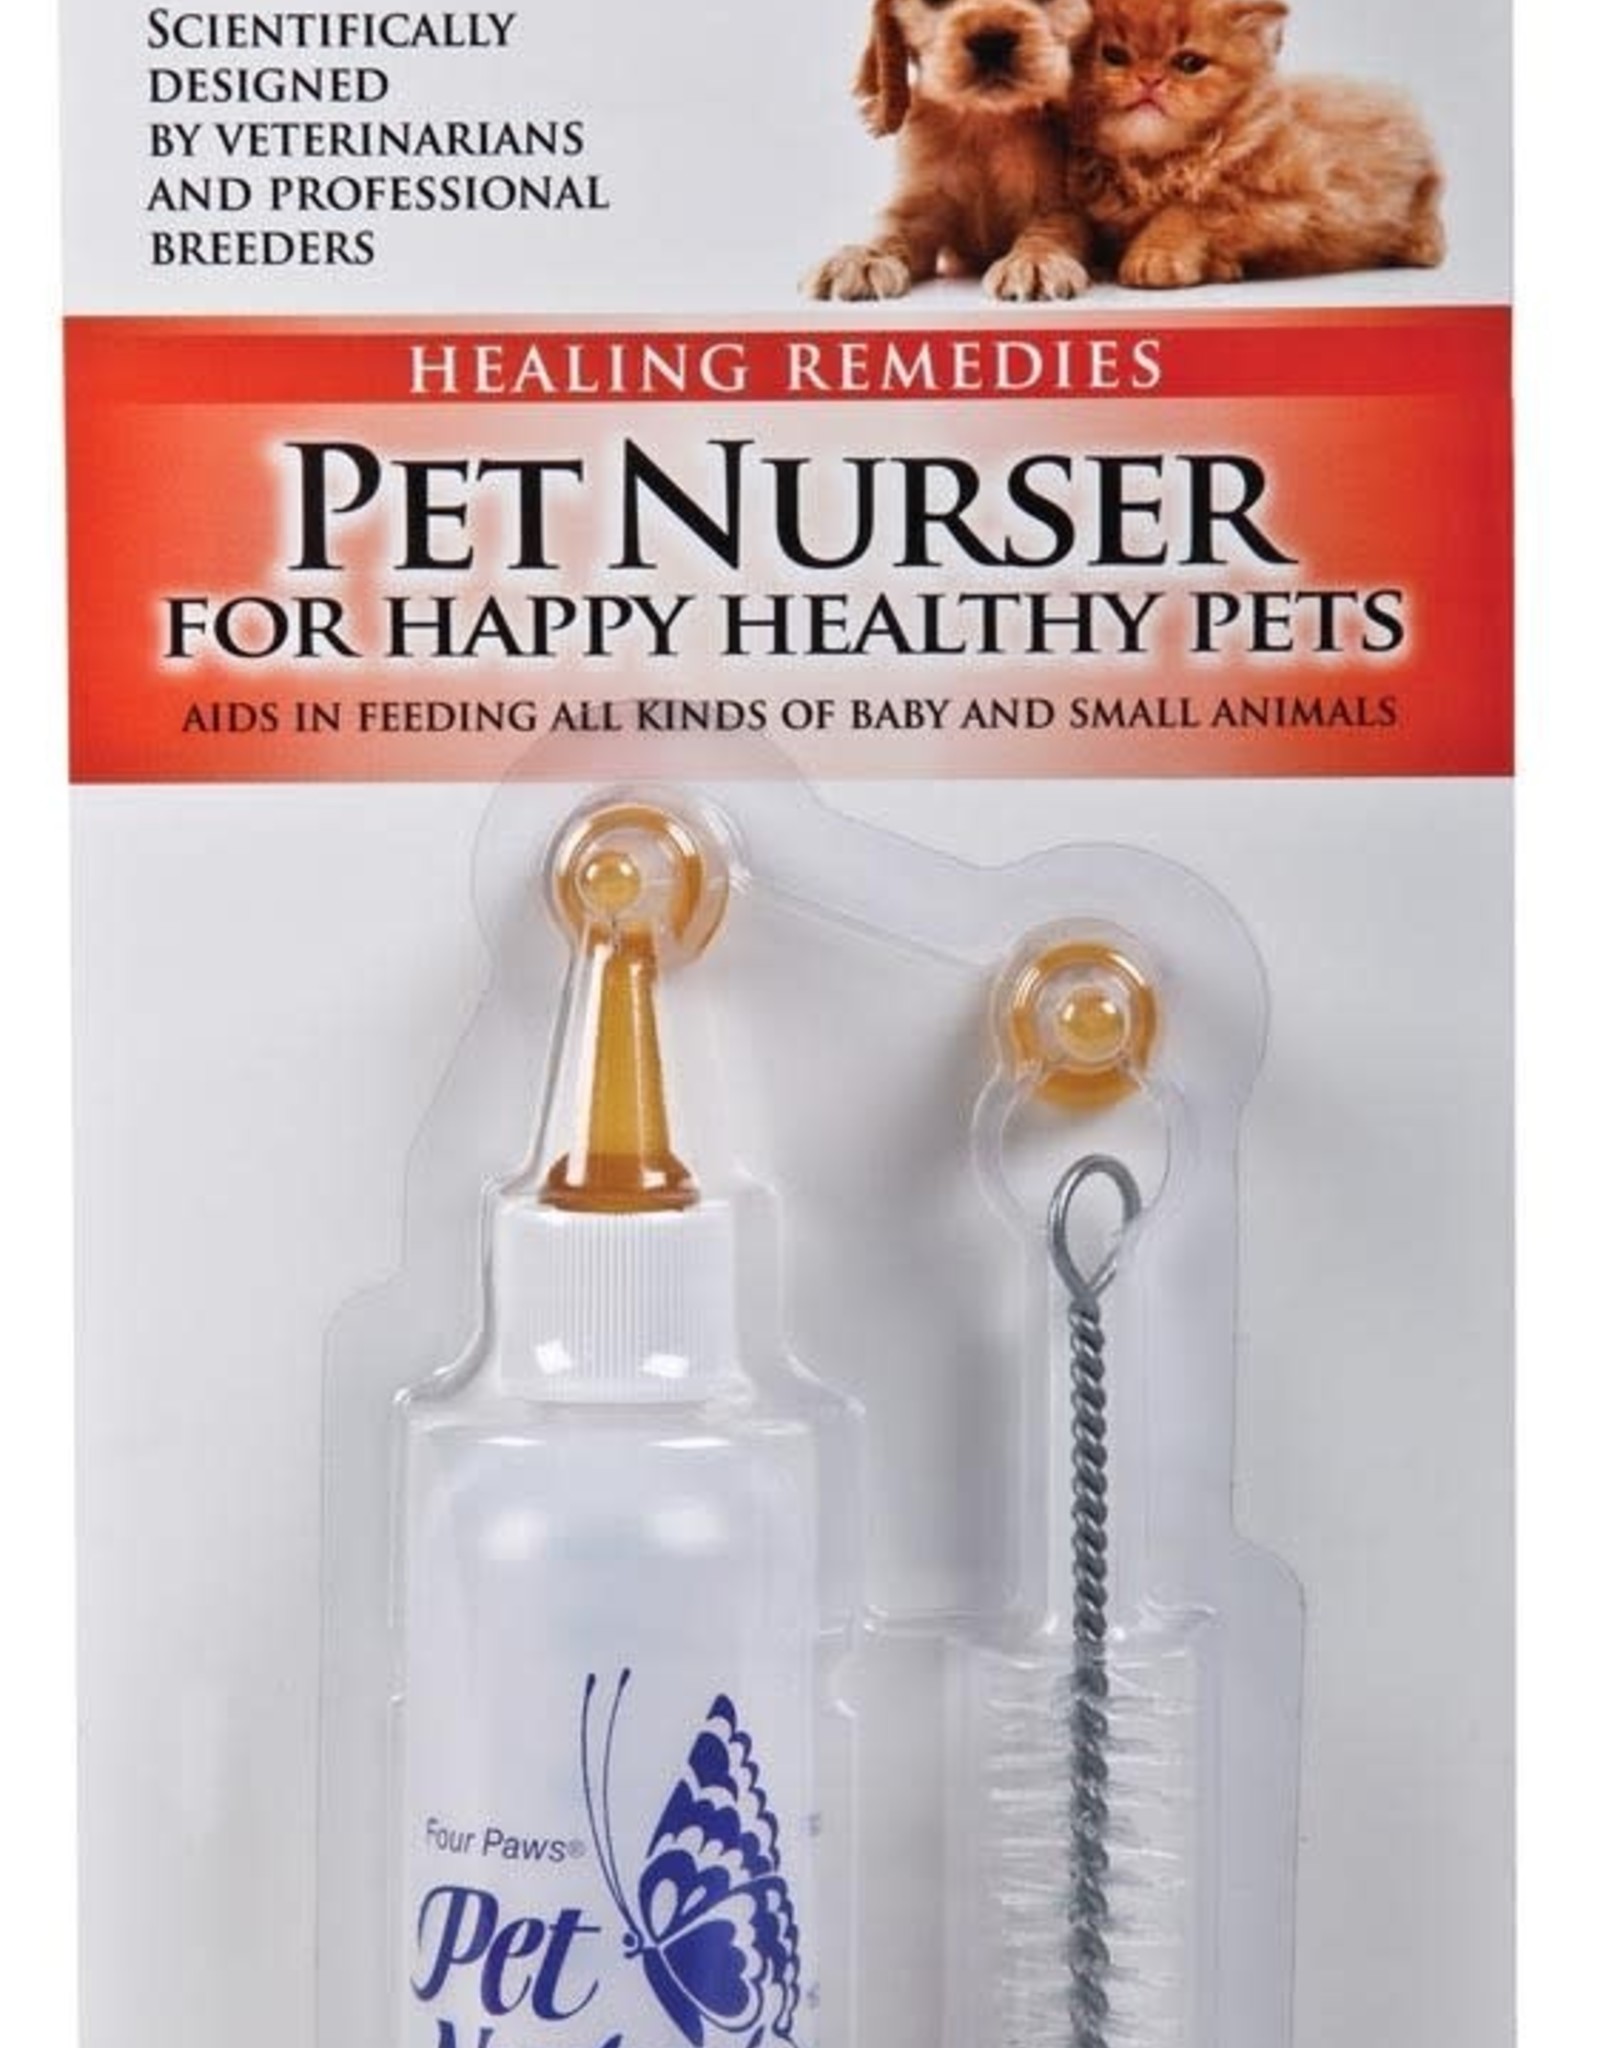 FOUR PAWS PET PRODUCTS Four Paws 2oz nurser kit w/cleaning brush